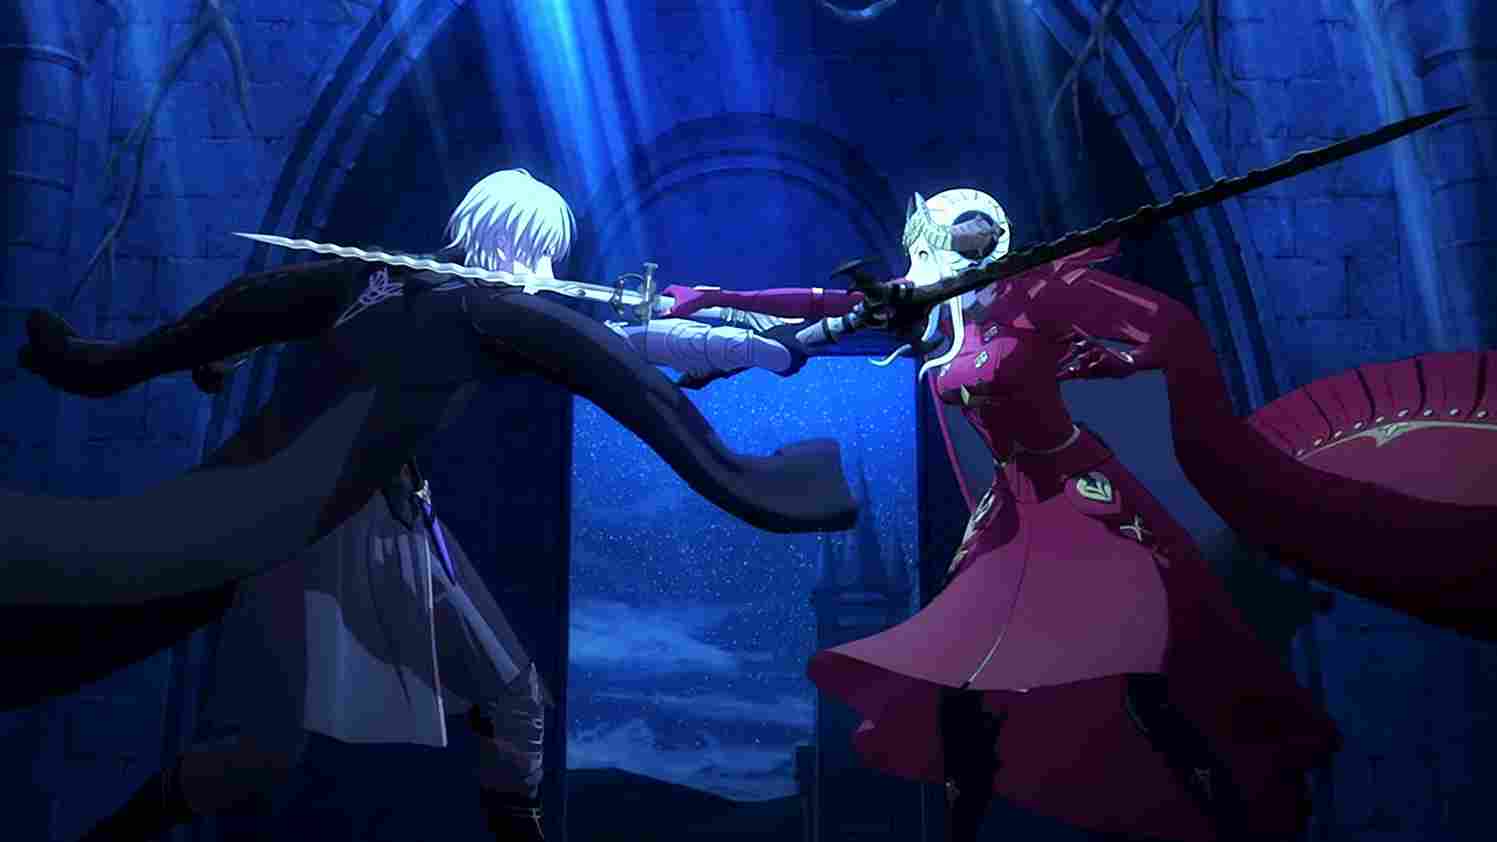 Byleth and Edelgard crossing swords.